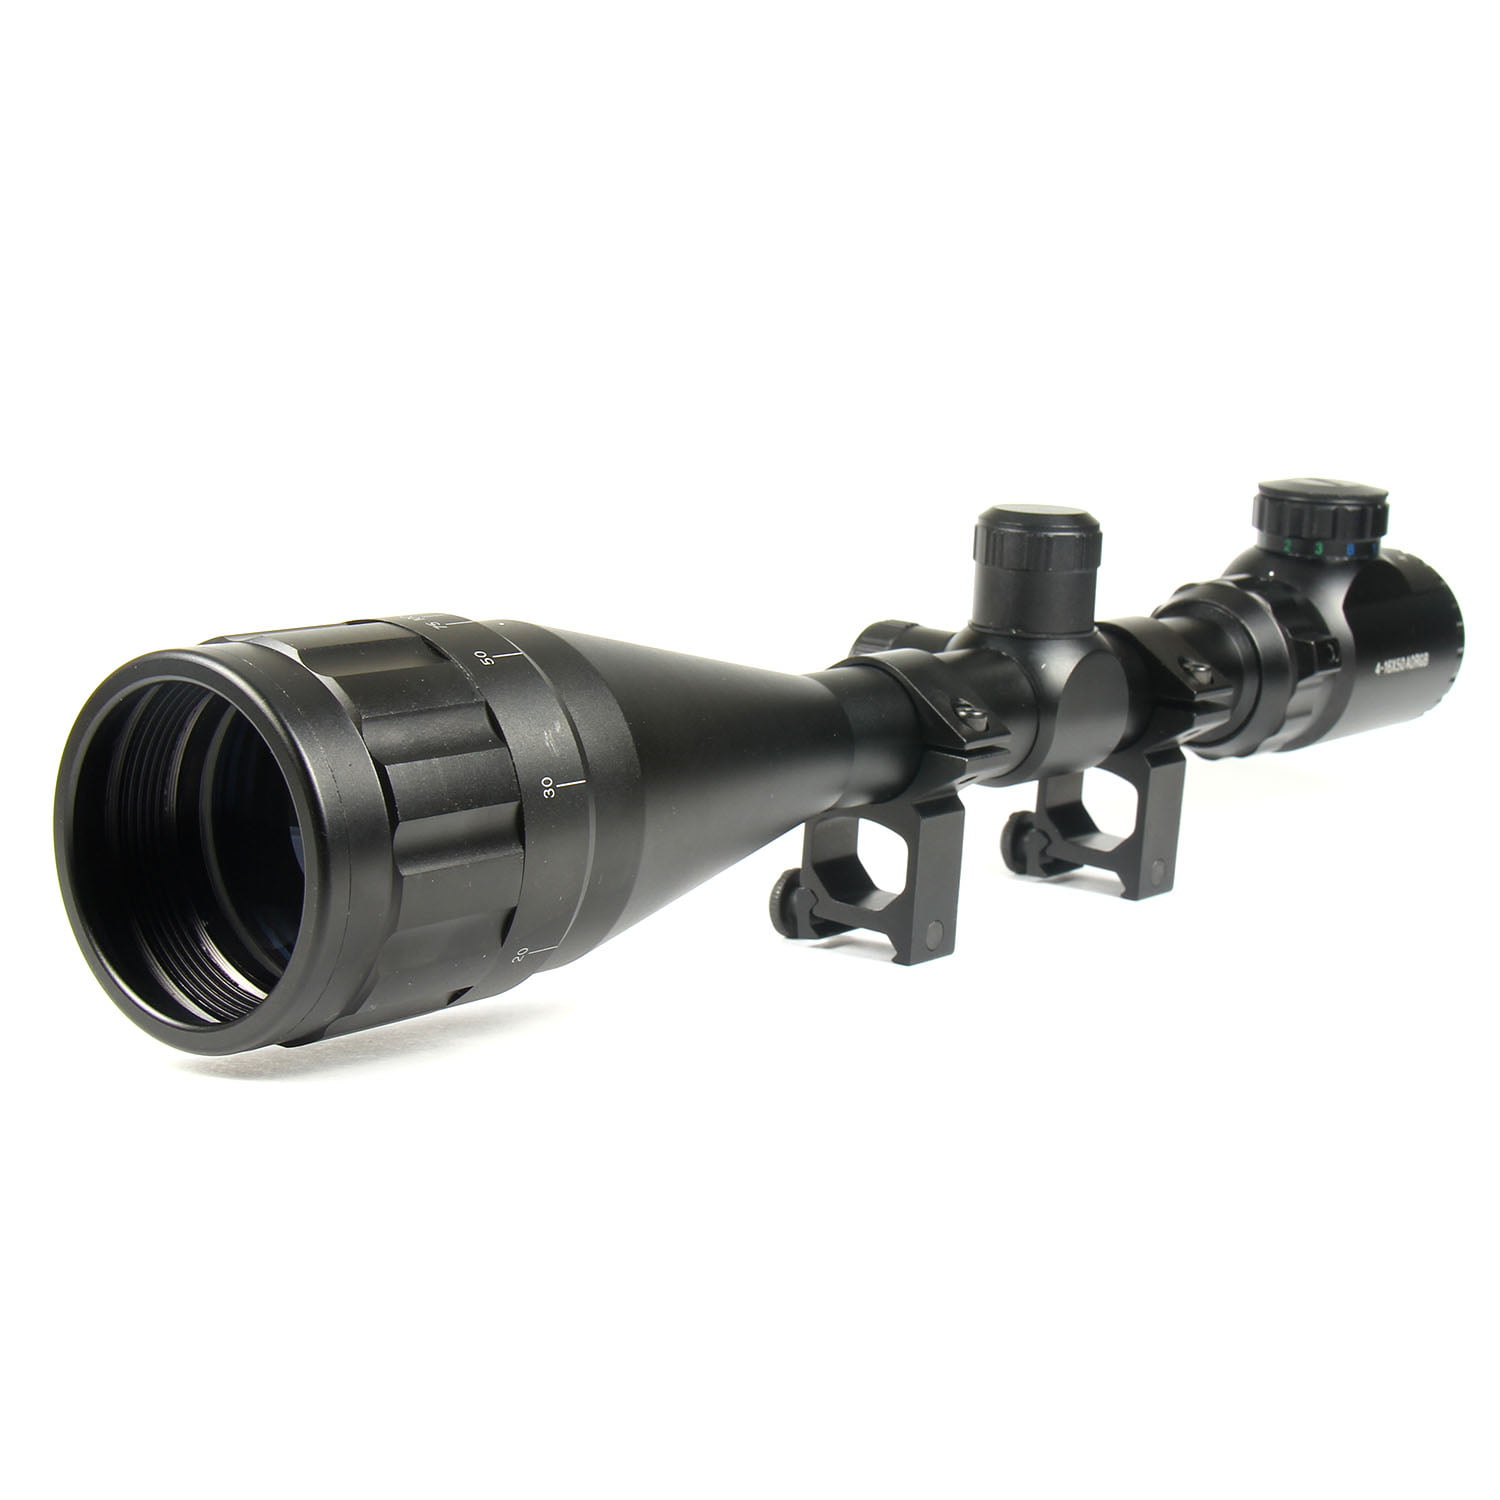 Rifle Scope 6-24x50 Tactical Mil Dot IR Red illuminated Reticle Hunting w/ Mount